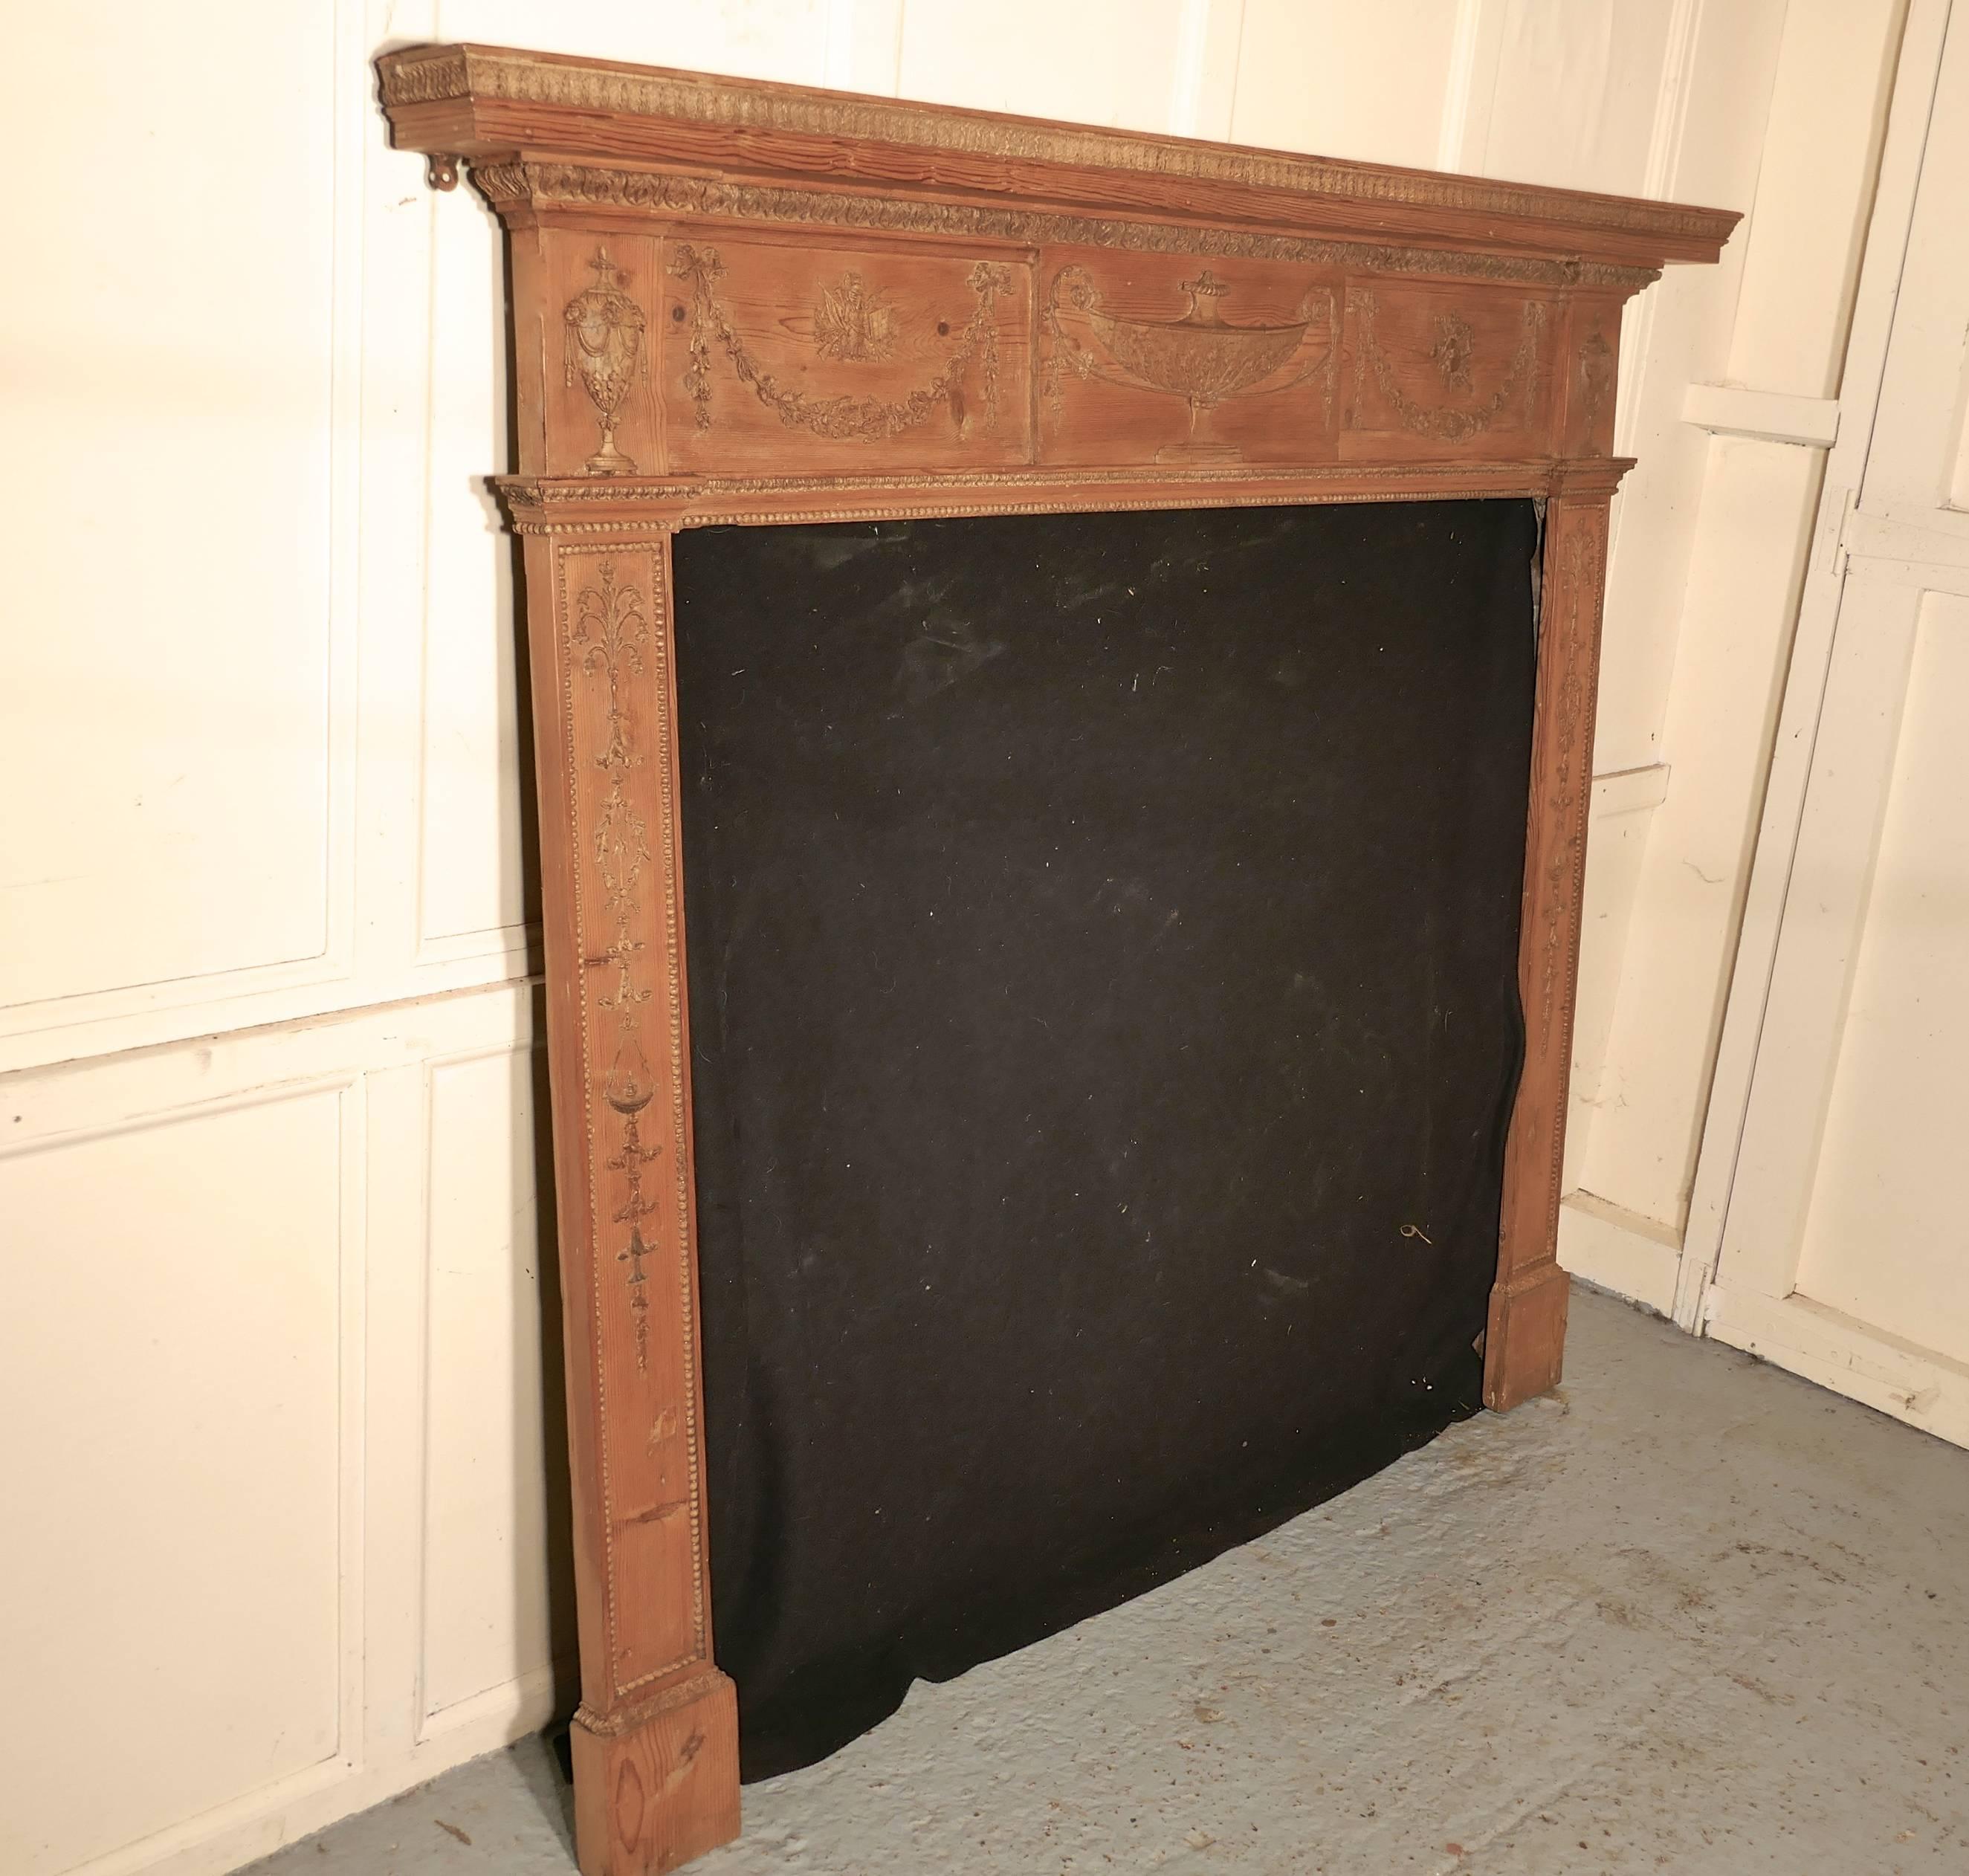 A Large 19th Century Adams Style Stripped Pine Fireplace.

The Fireplace has a large mantle piece and a large opening for the fire
The Fireplace has been reclaimed during house renovations, it is a Large Sitting Room Size and in all  round good